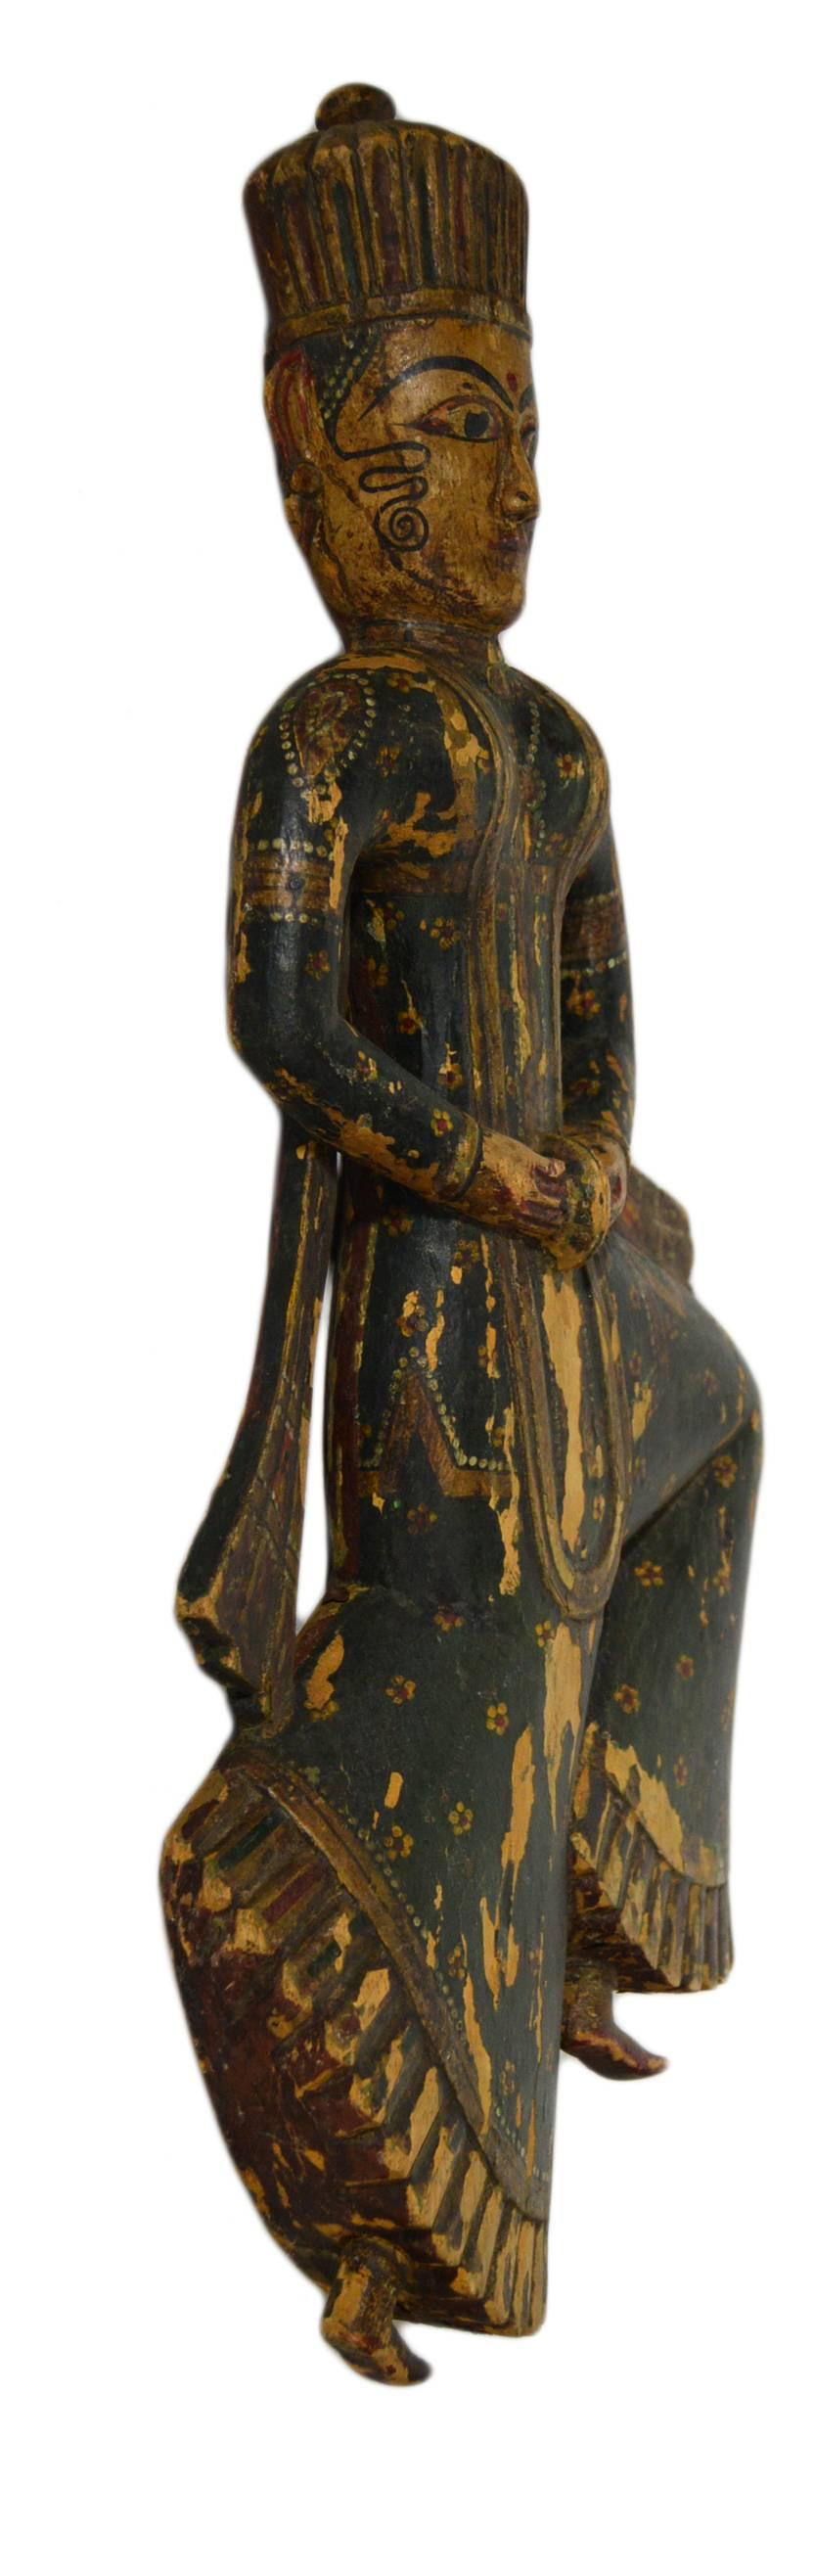 An antique temple statue carved and hand-painted in Indonesia in the early 20th century. This wooden statue shows an Indonesian dancing character. His dynamism is enhanced by his flying scarves and by his posture. The character wears black adorned